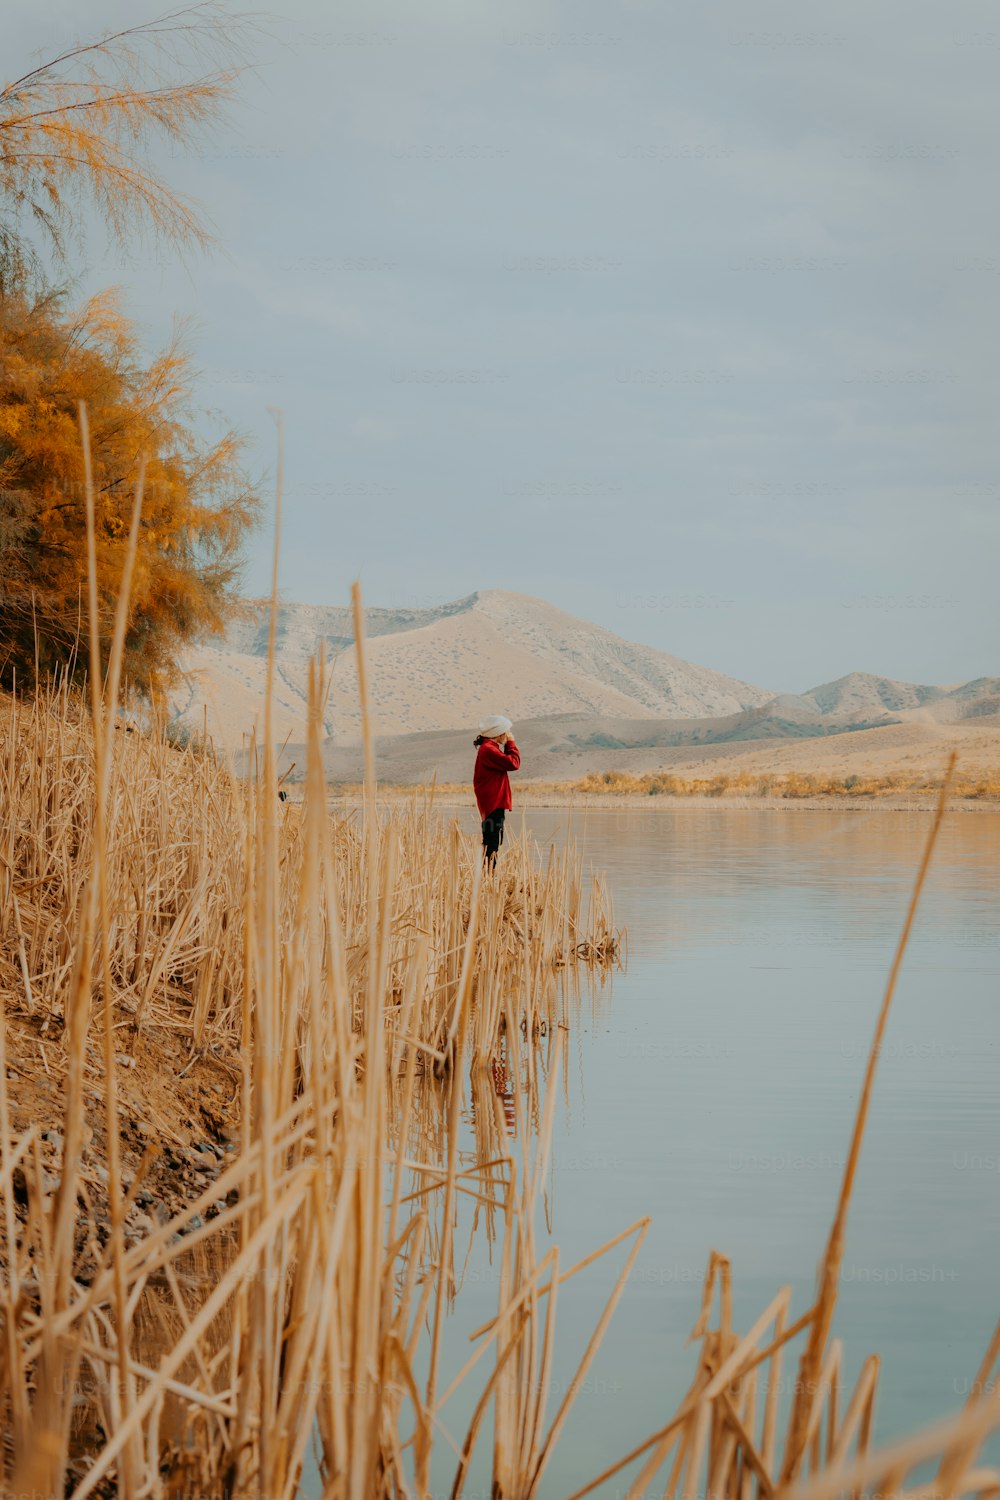 a person in a red jacket standing by a body of water